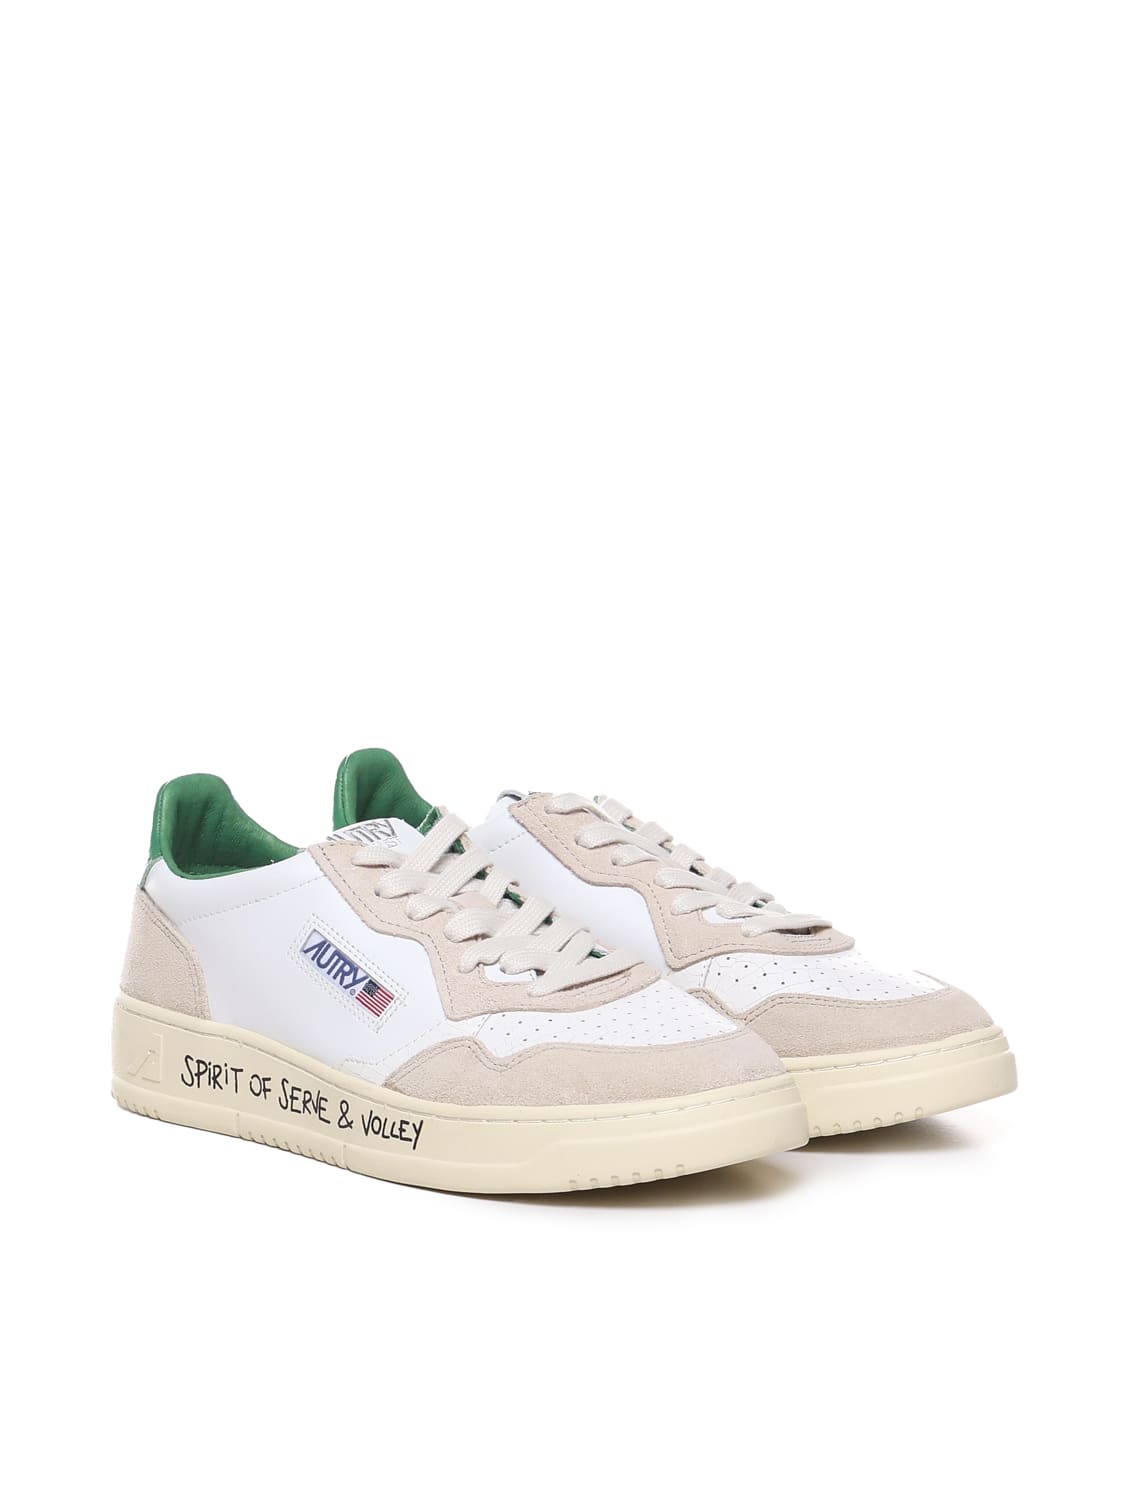 Shop Autry Sneakers Medalist Vy03